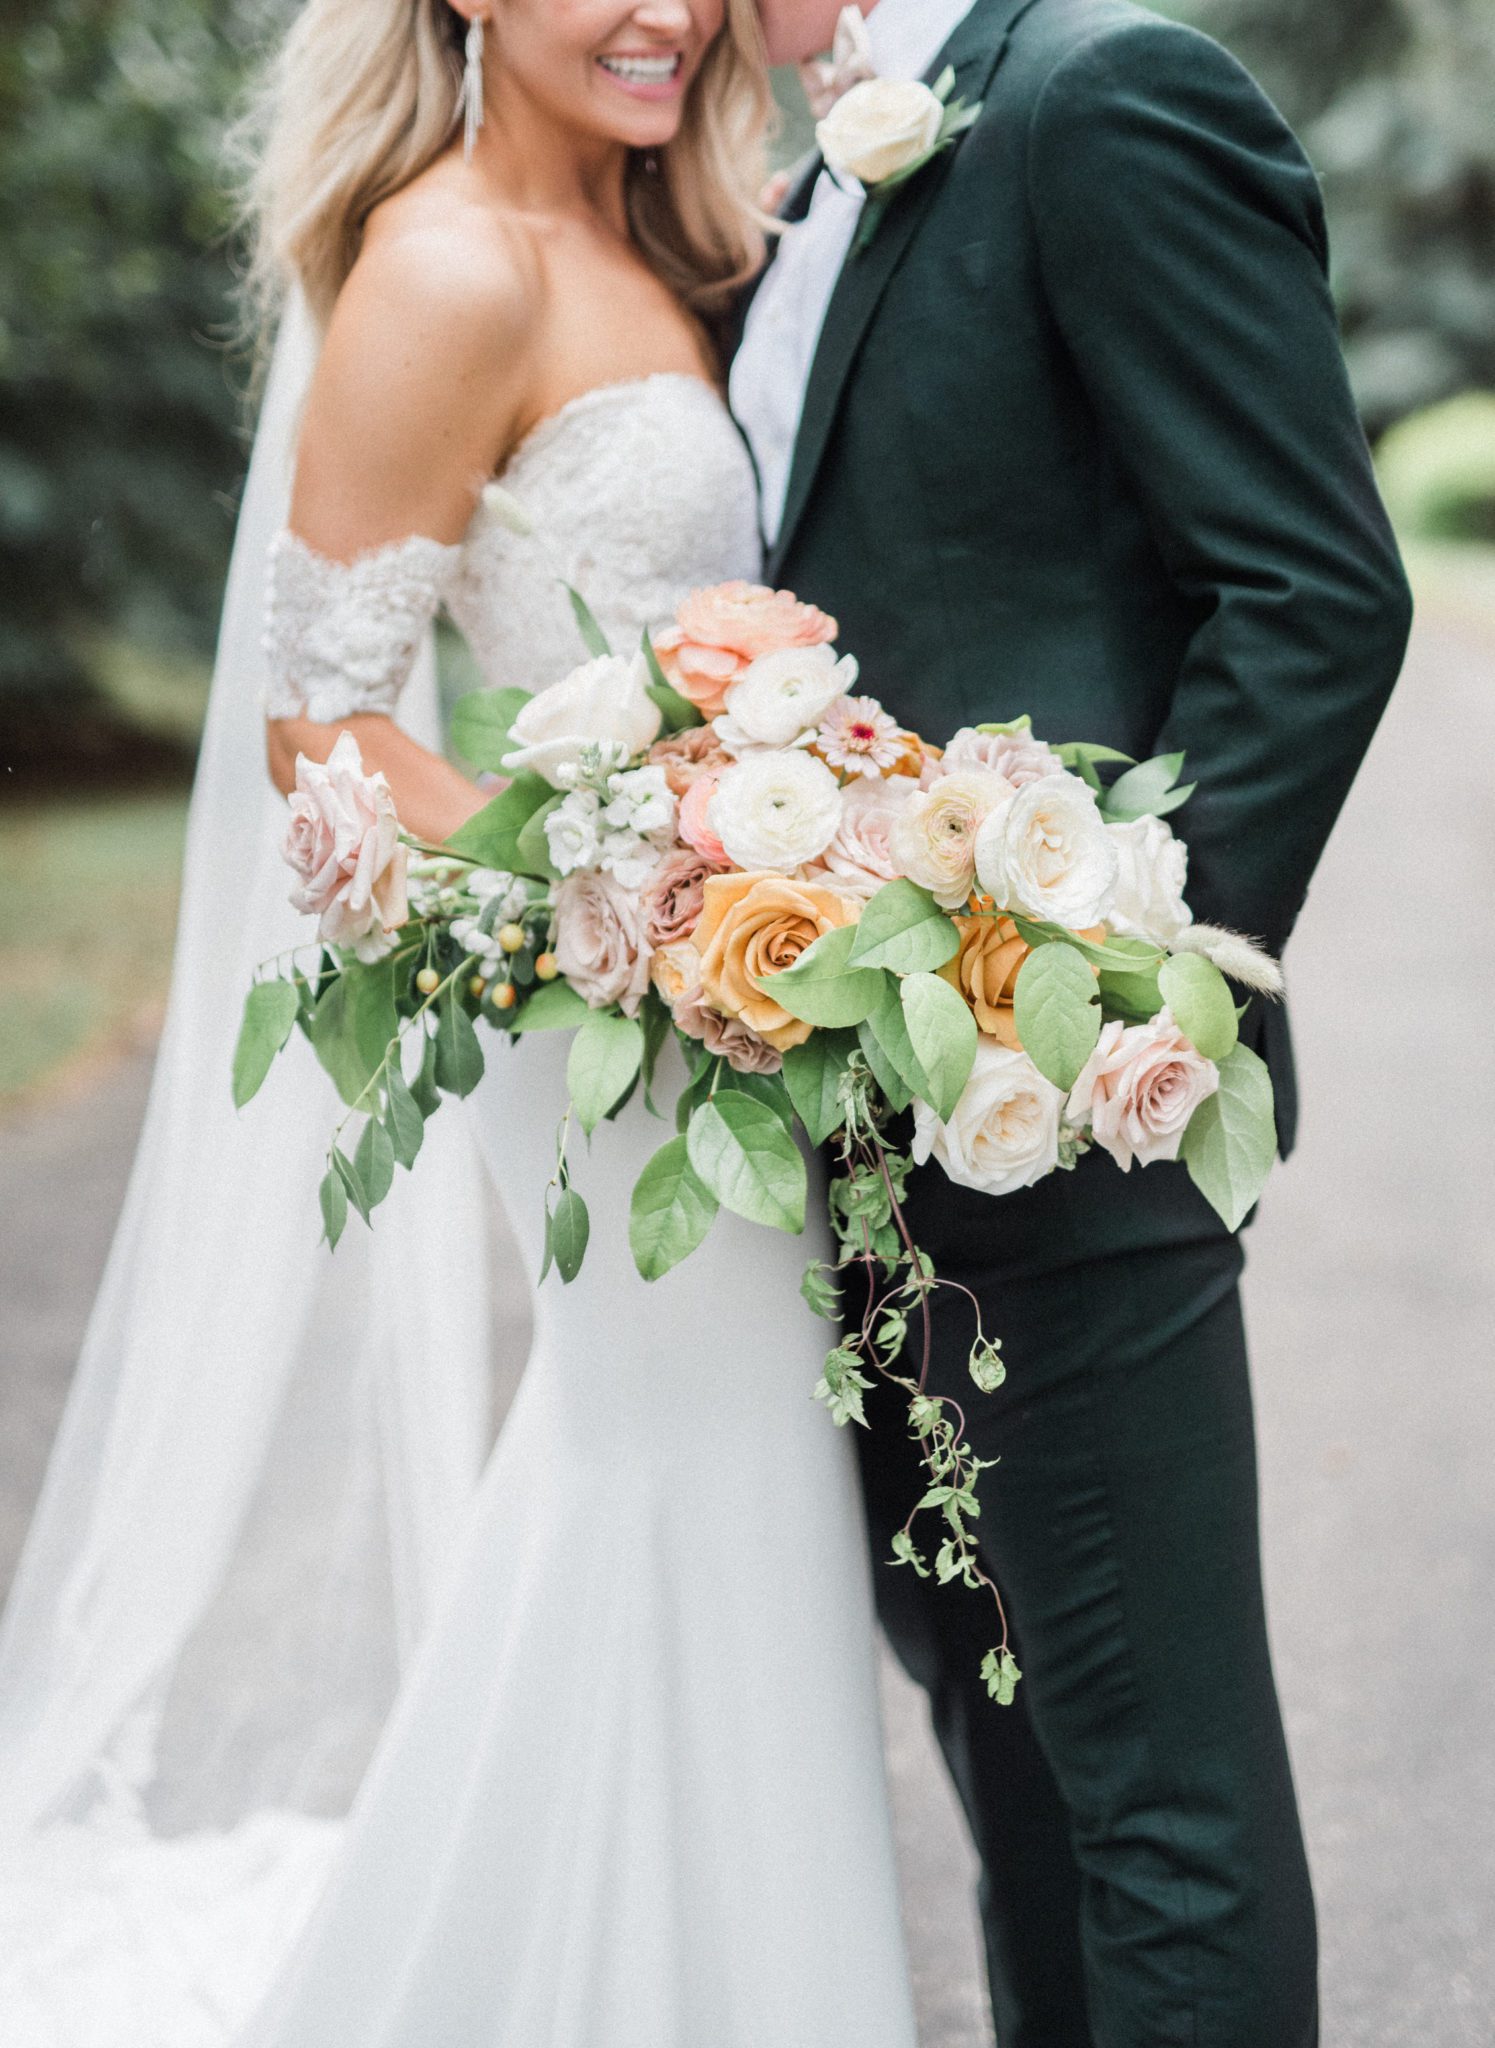 Classically styled bride and groom pose with a romantic bridal bouquet